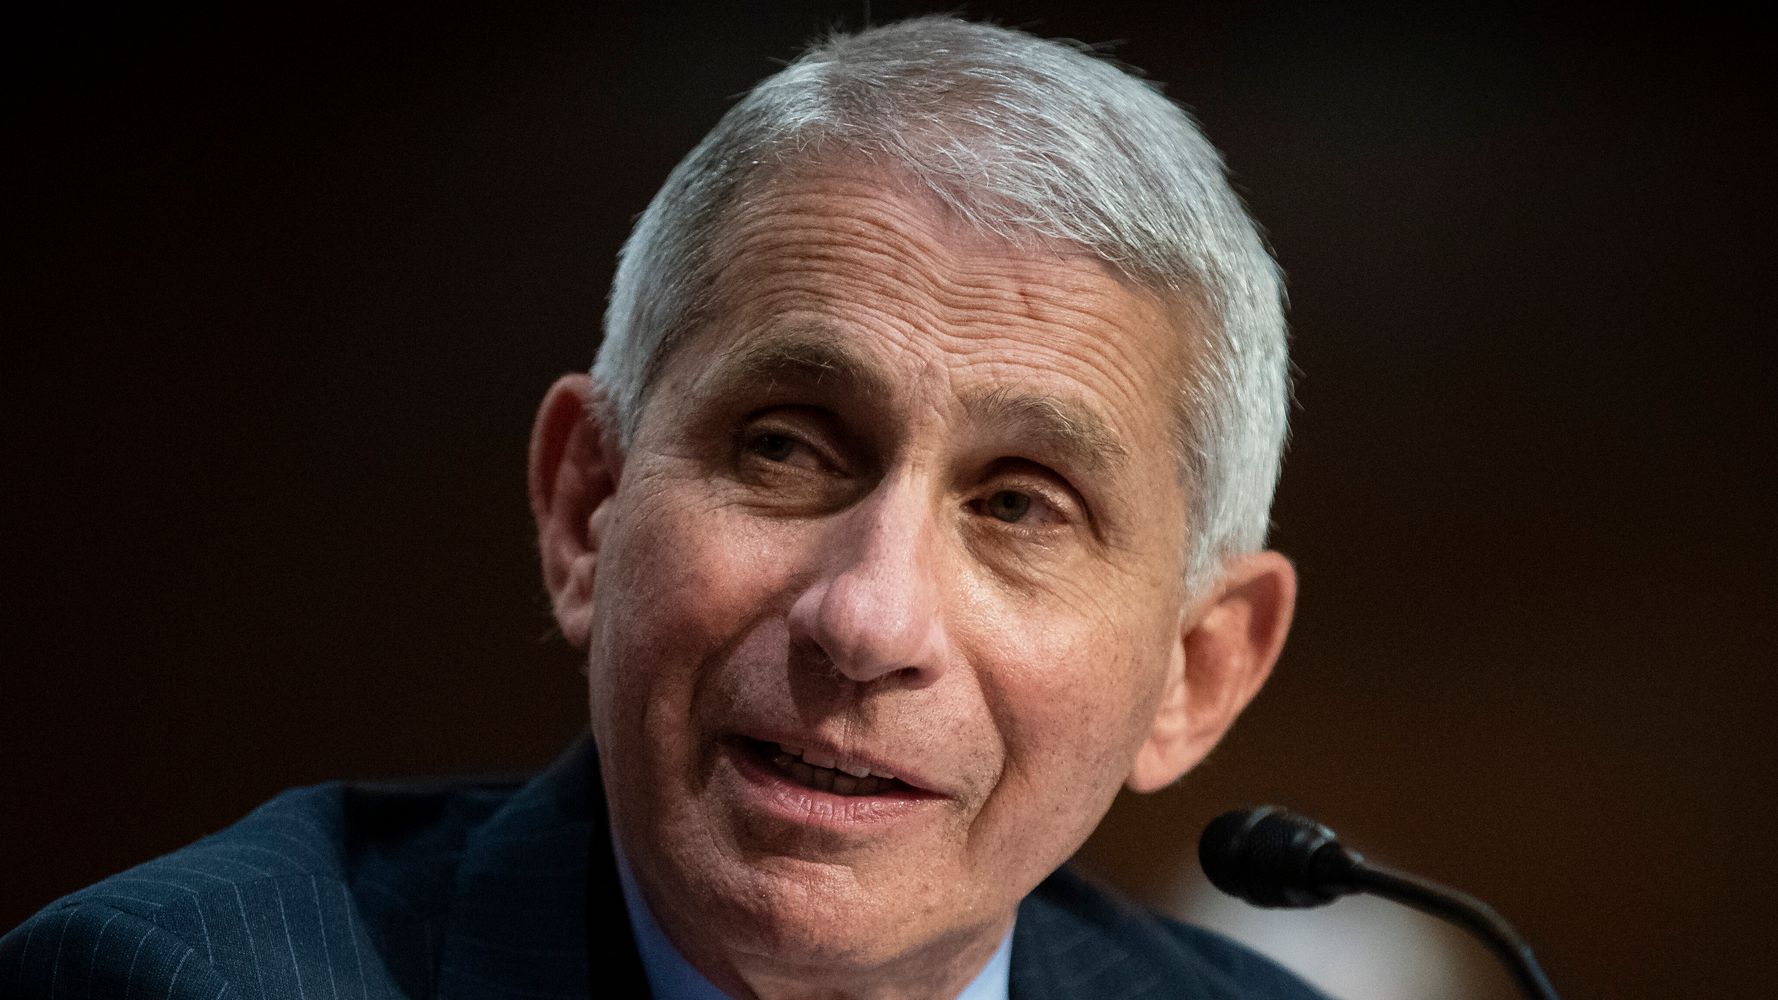 ‘What Leadership Looks Like’: Old Fauci Pic Resurfaces Amid White House Attacks